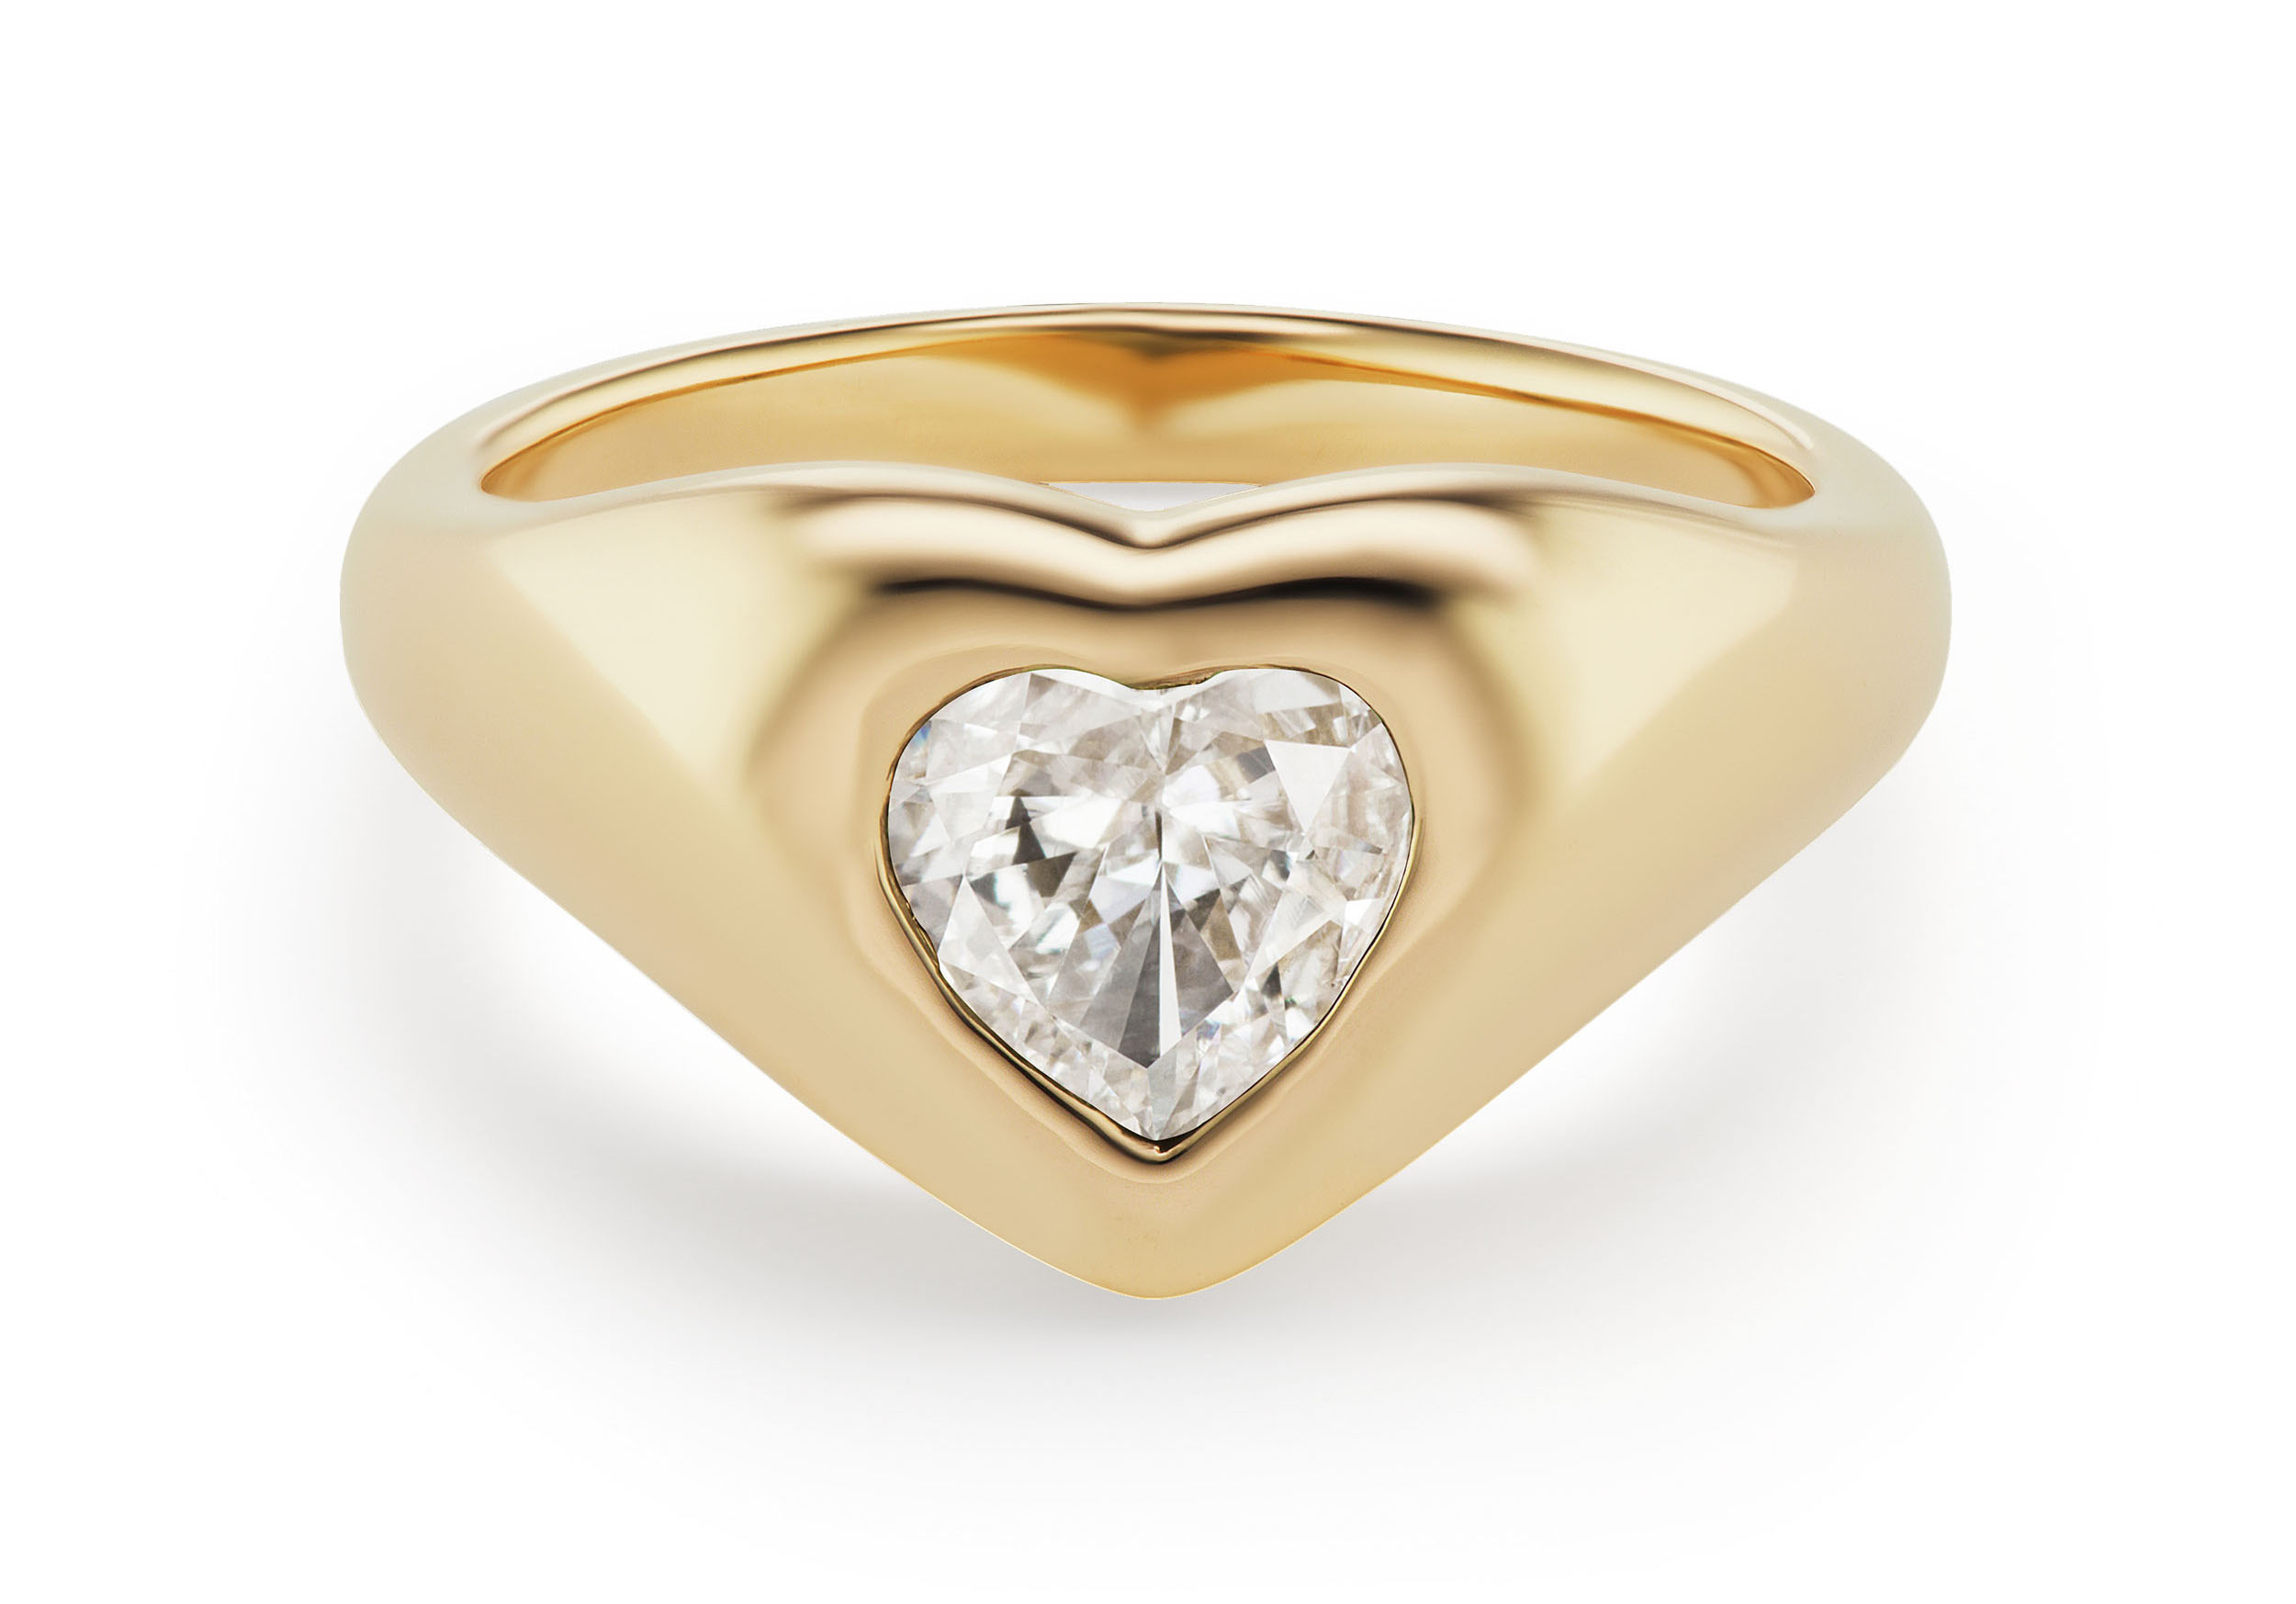 Diamond Heart Gypsy Ring - Only Natural Diamonds